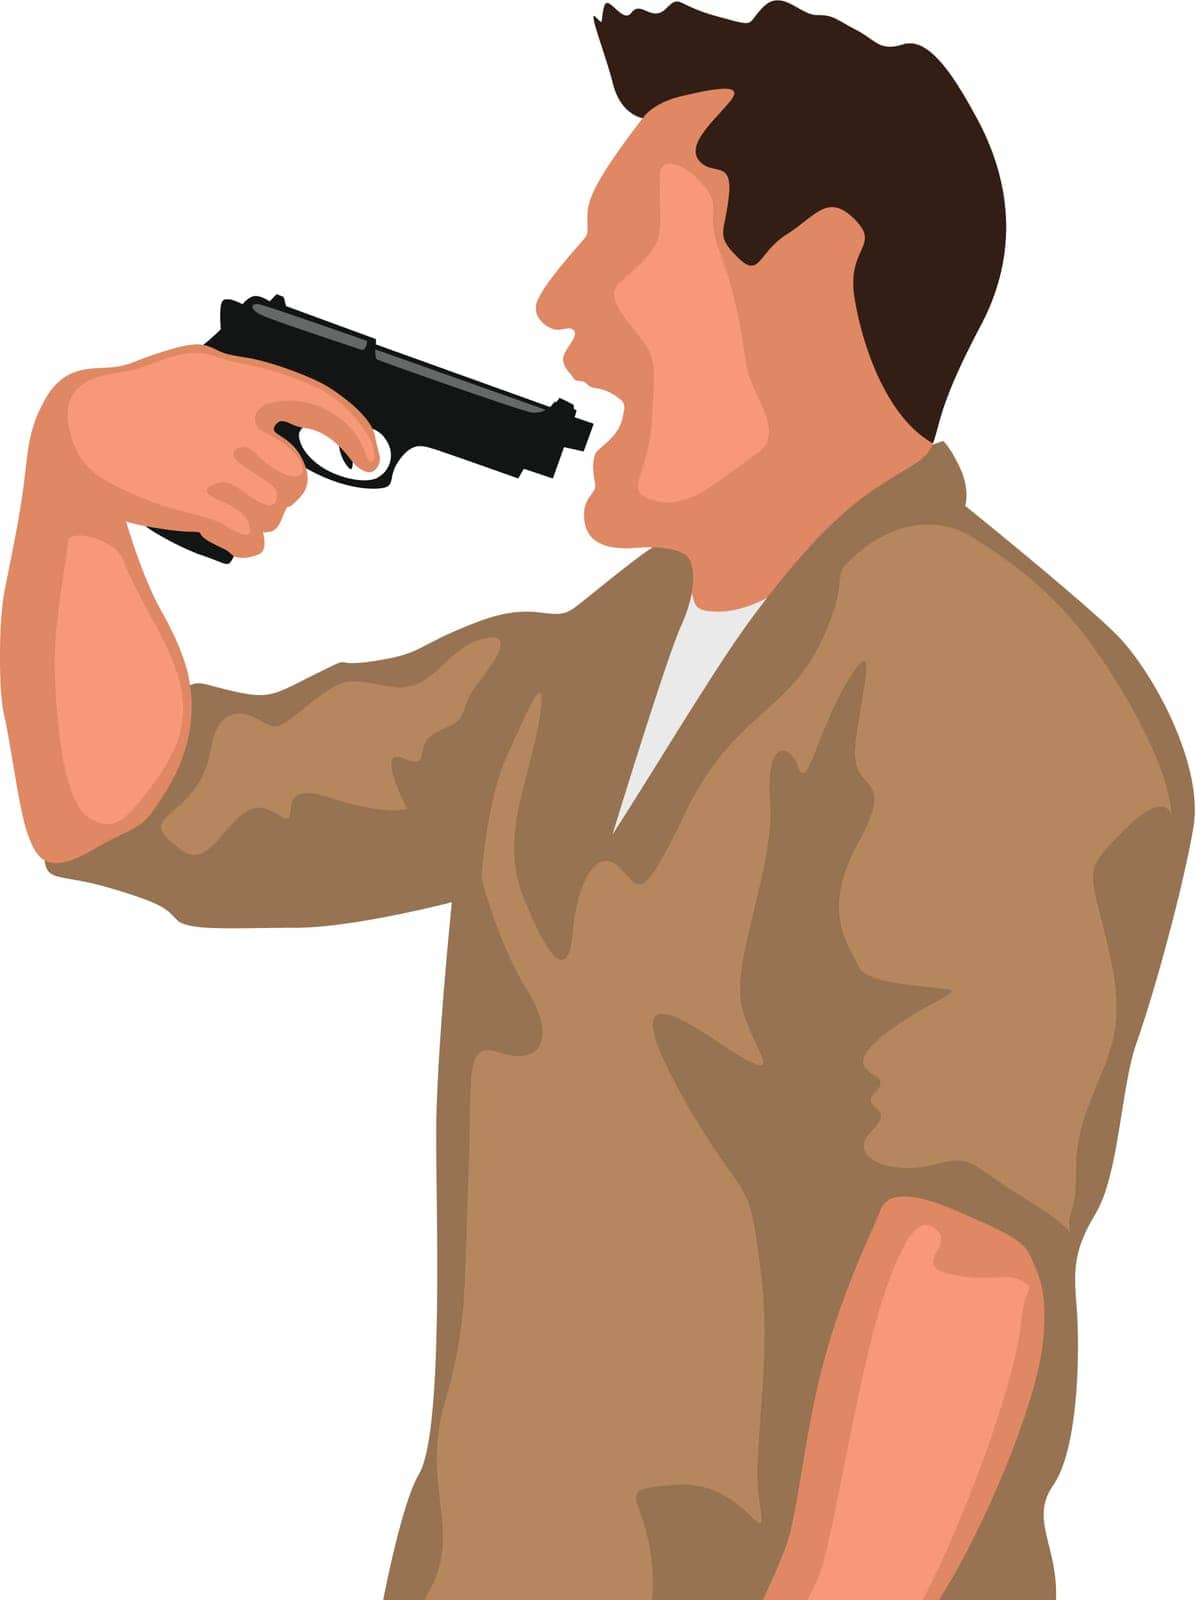 man with gun suicide by IfH